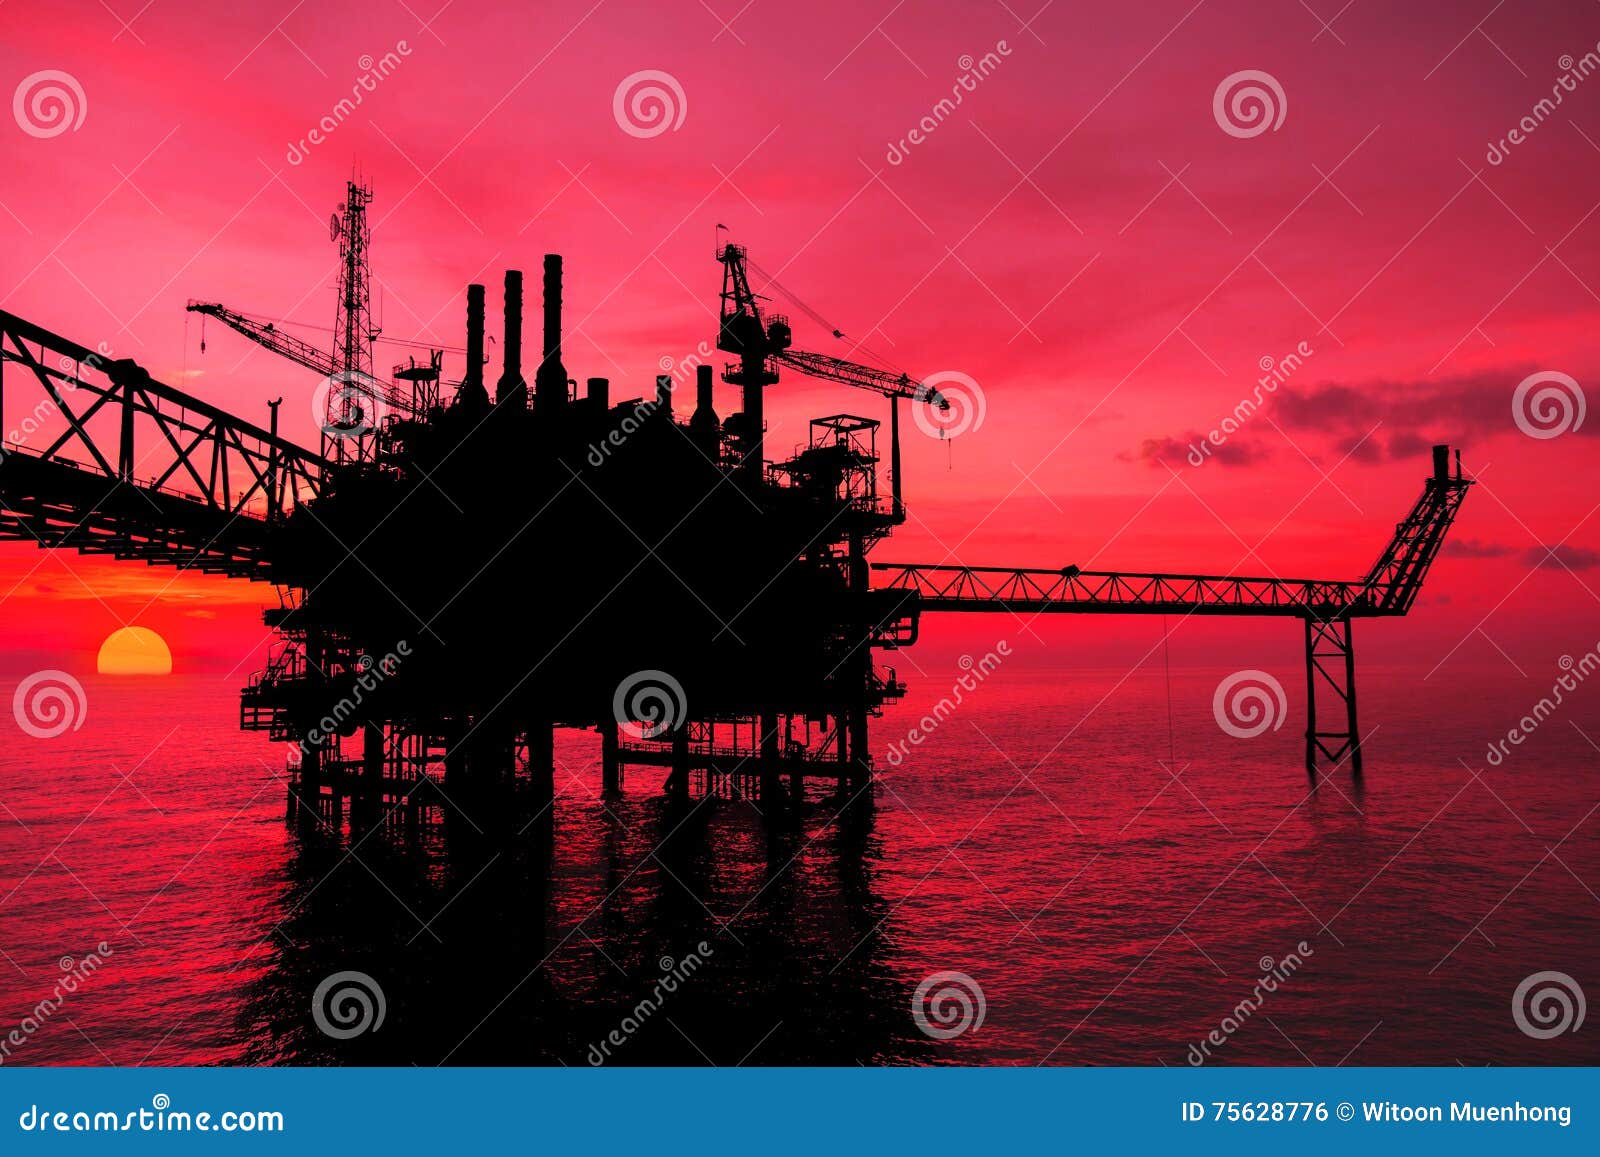 silhouette,offshore oil and rig platform